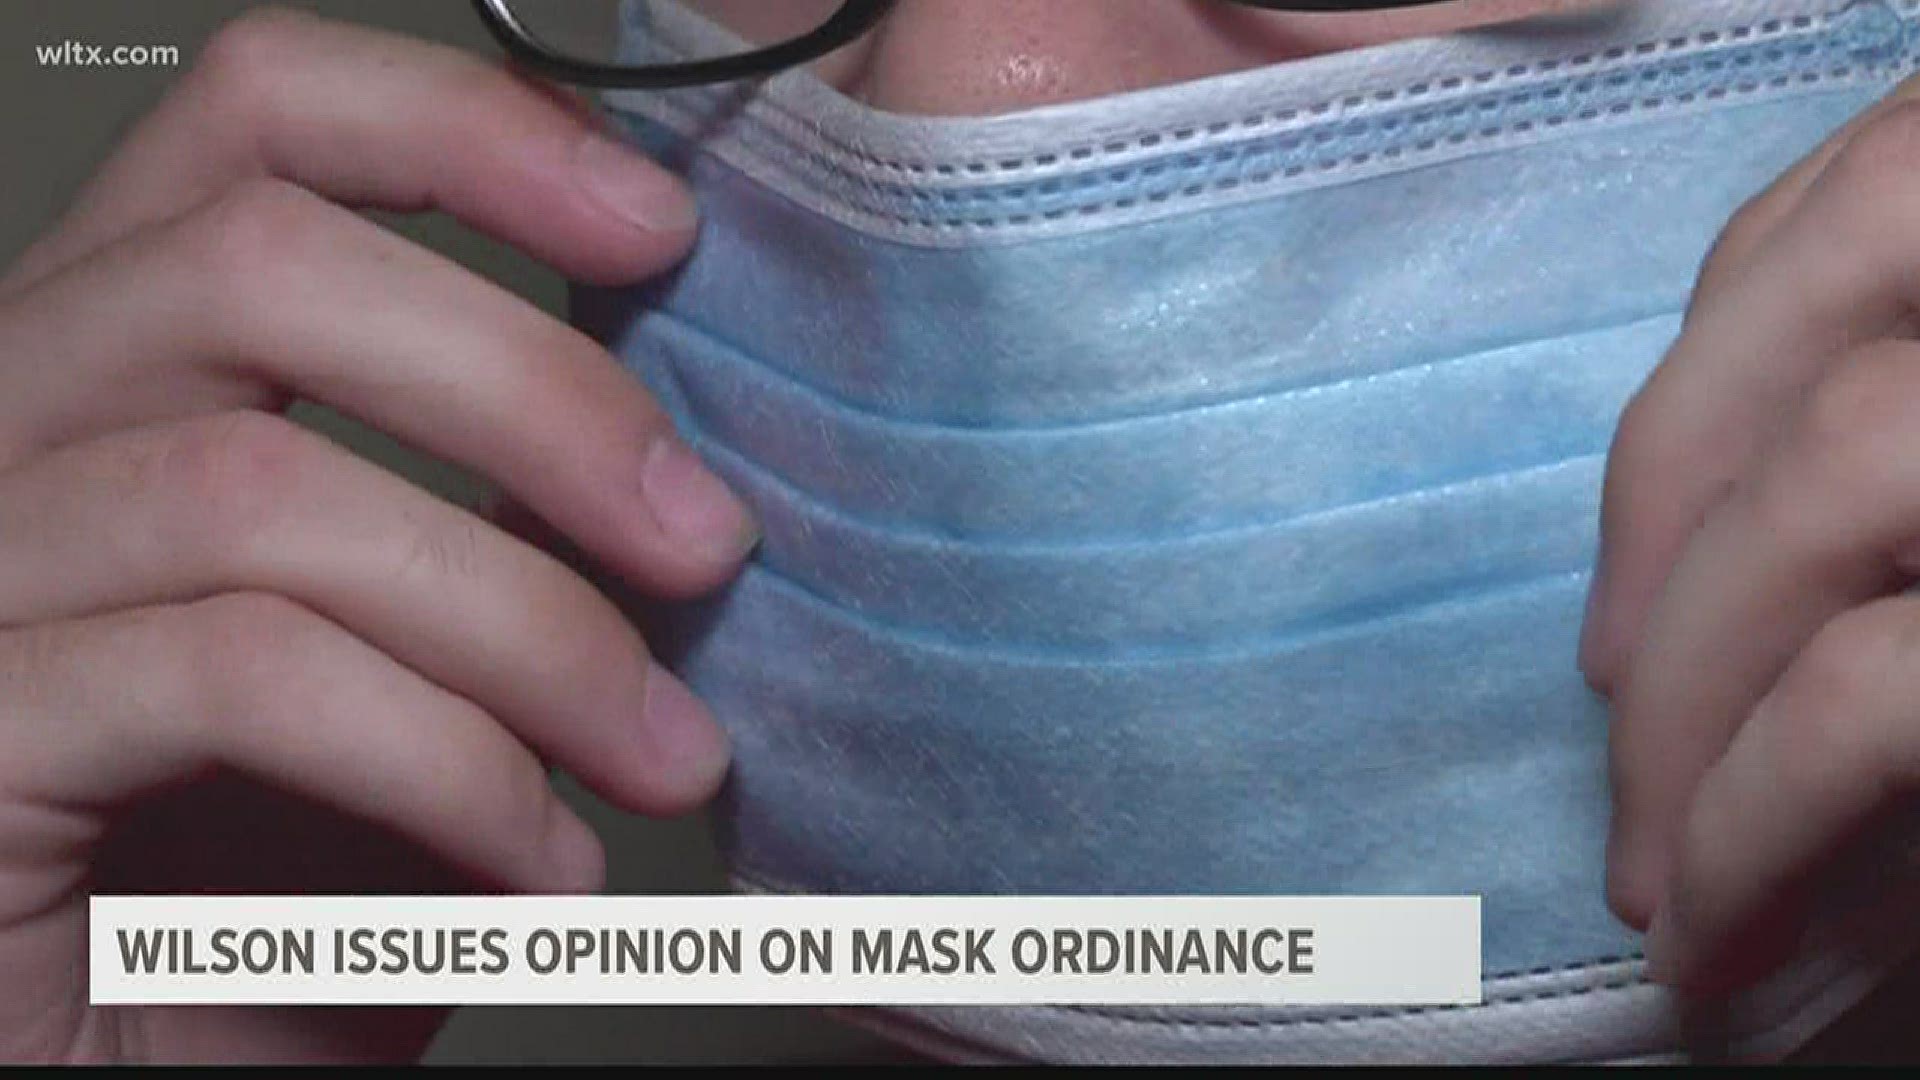 South Carolina Attorney General Alan Wilson said he believes face mask ordinances that are being passed by local governments are legal and constitutional.